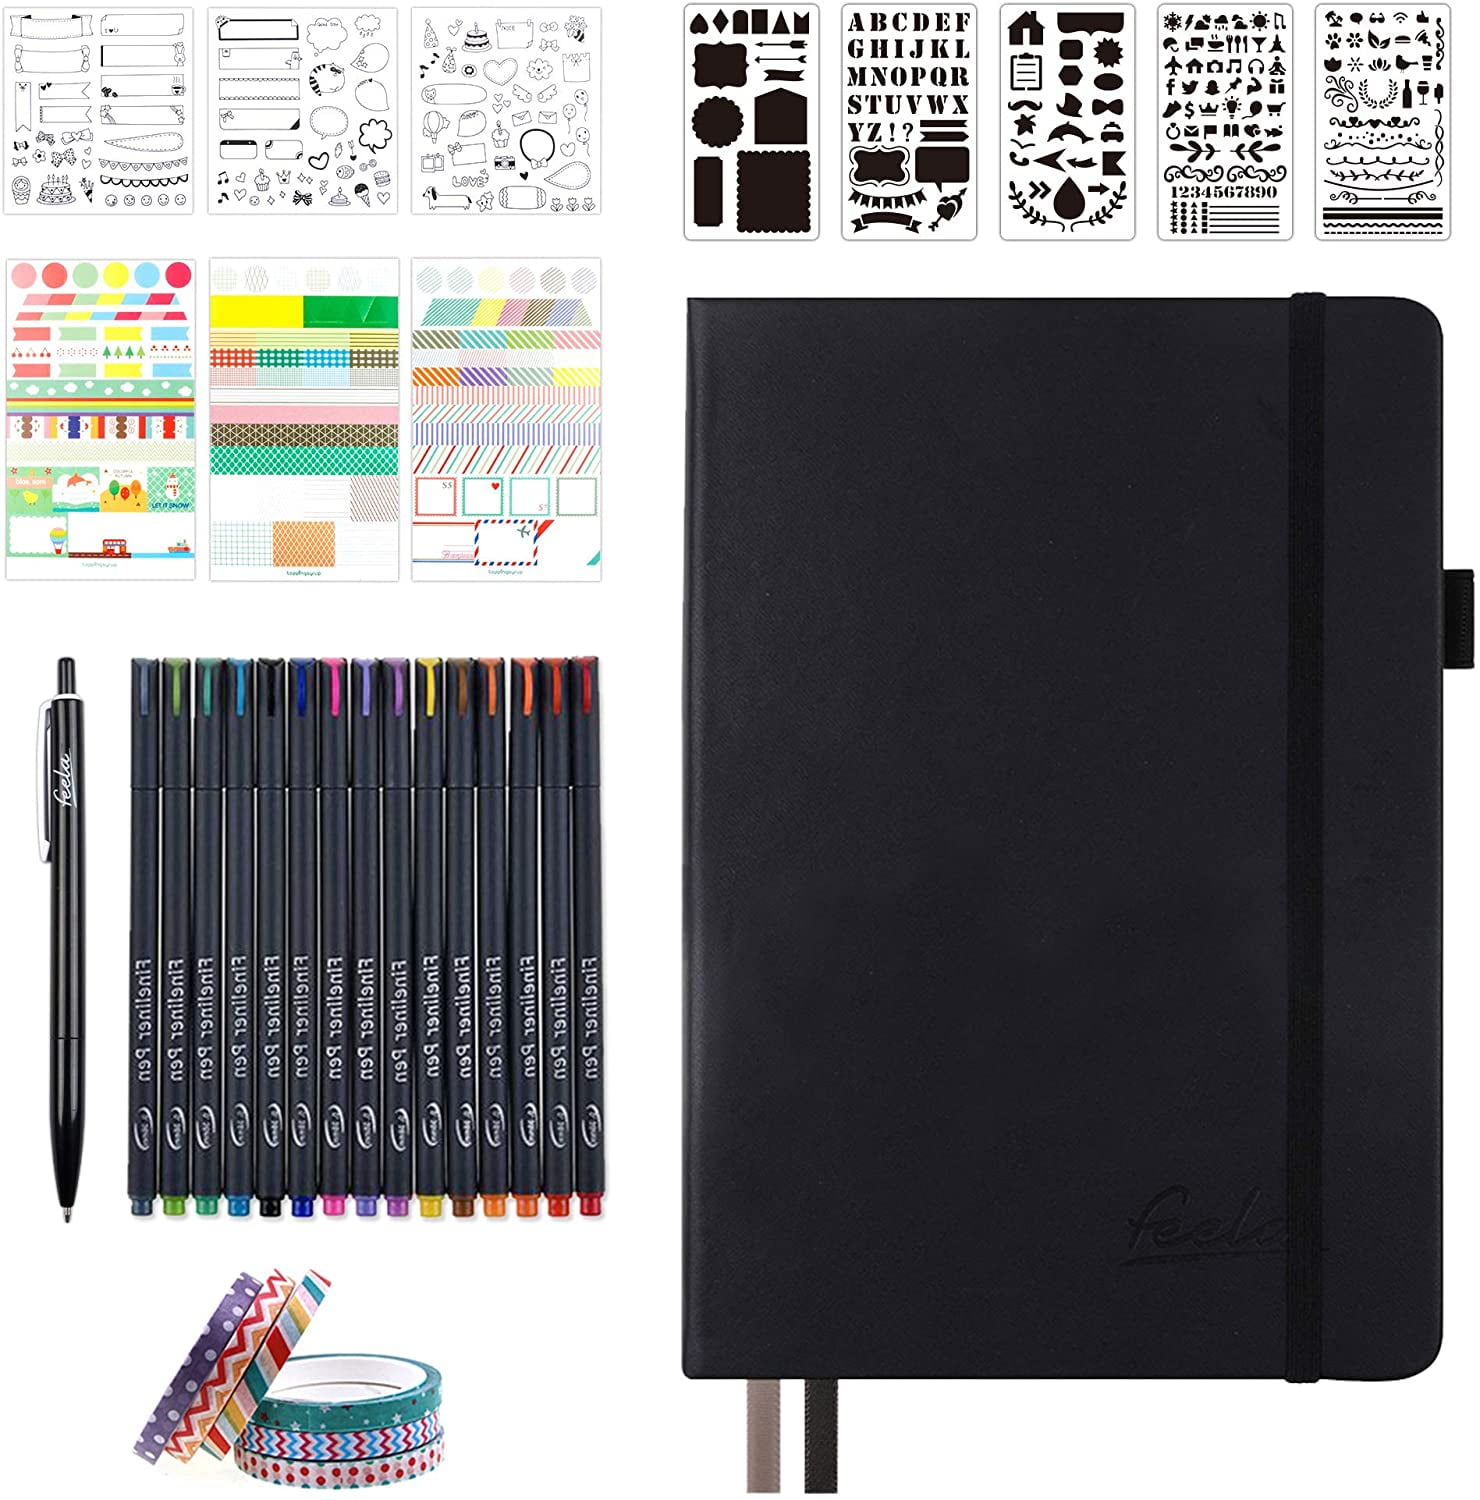 Bullet Dotted Journal Kit, Feela A5 Dotted Bullet Grid Journal Set with 224 Pages Black Notebook, Fineliner Colored Pens, Stencils, Stickers, Washi